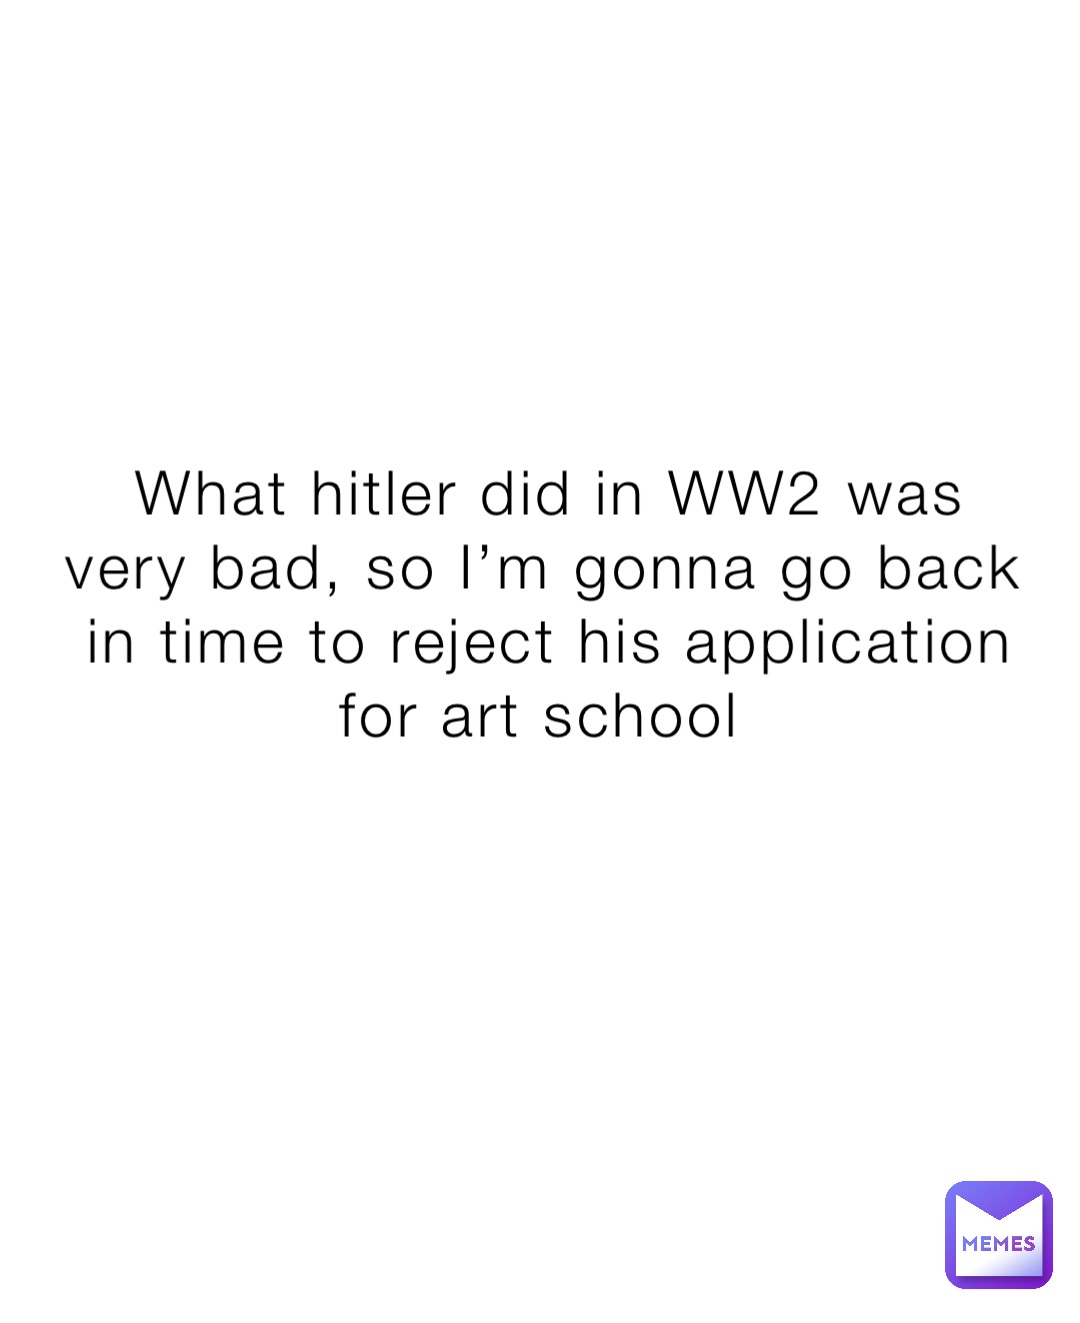 What hitler did in WW2 was very bad, so I’m gonna go back in time to reject his application for art school